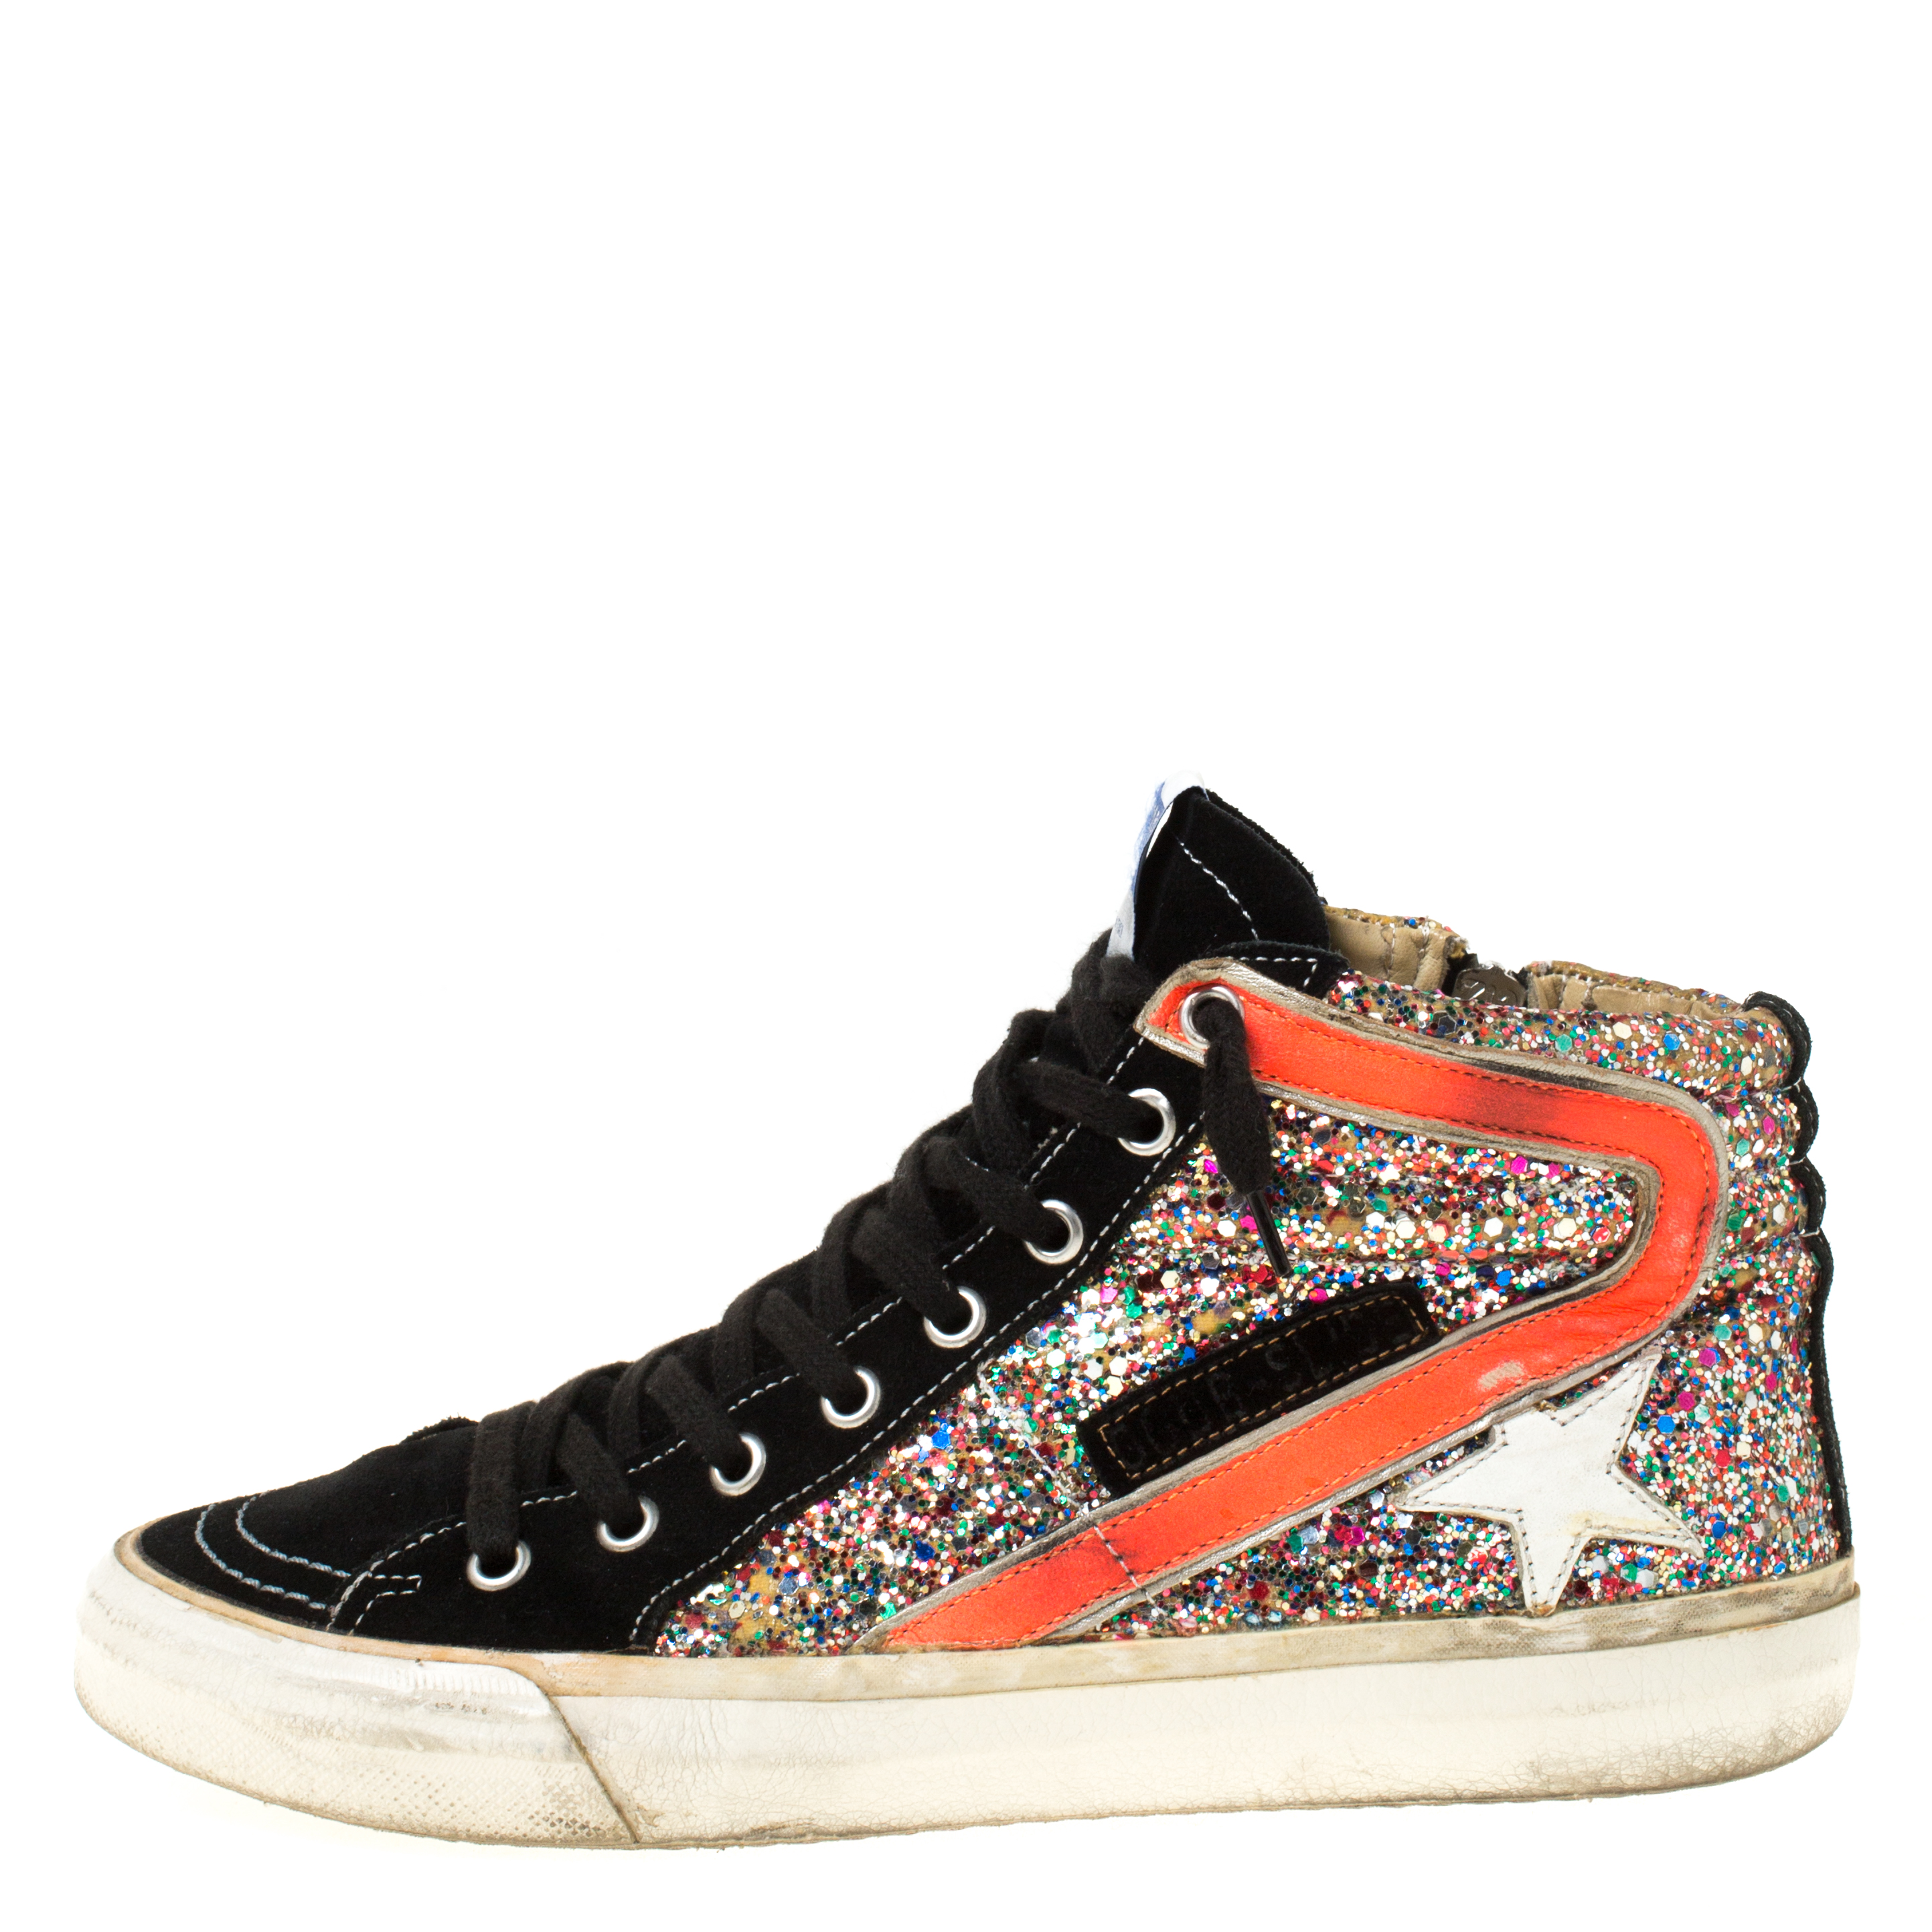 

Golden Goose Multicolor Suede and Glitter Slide High Top Sneakers Size